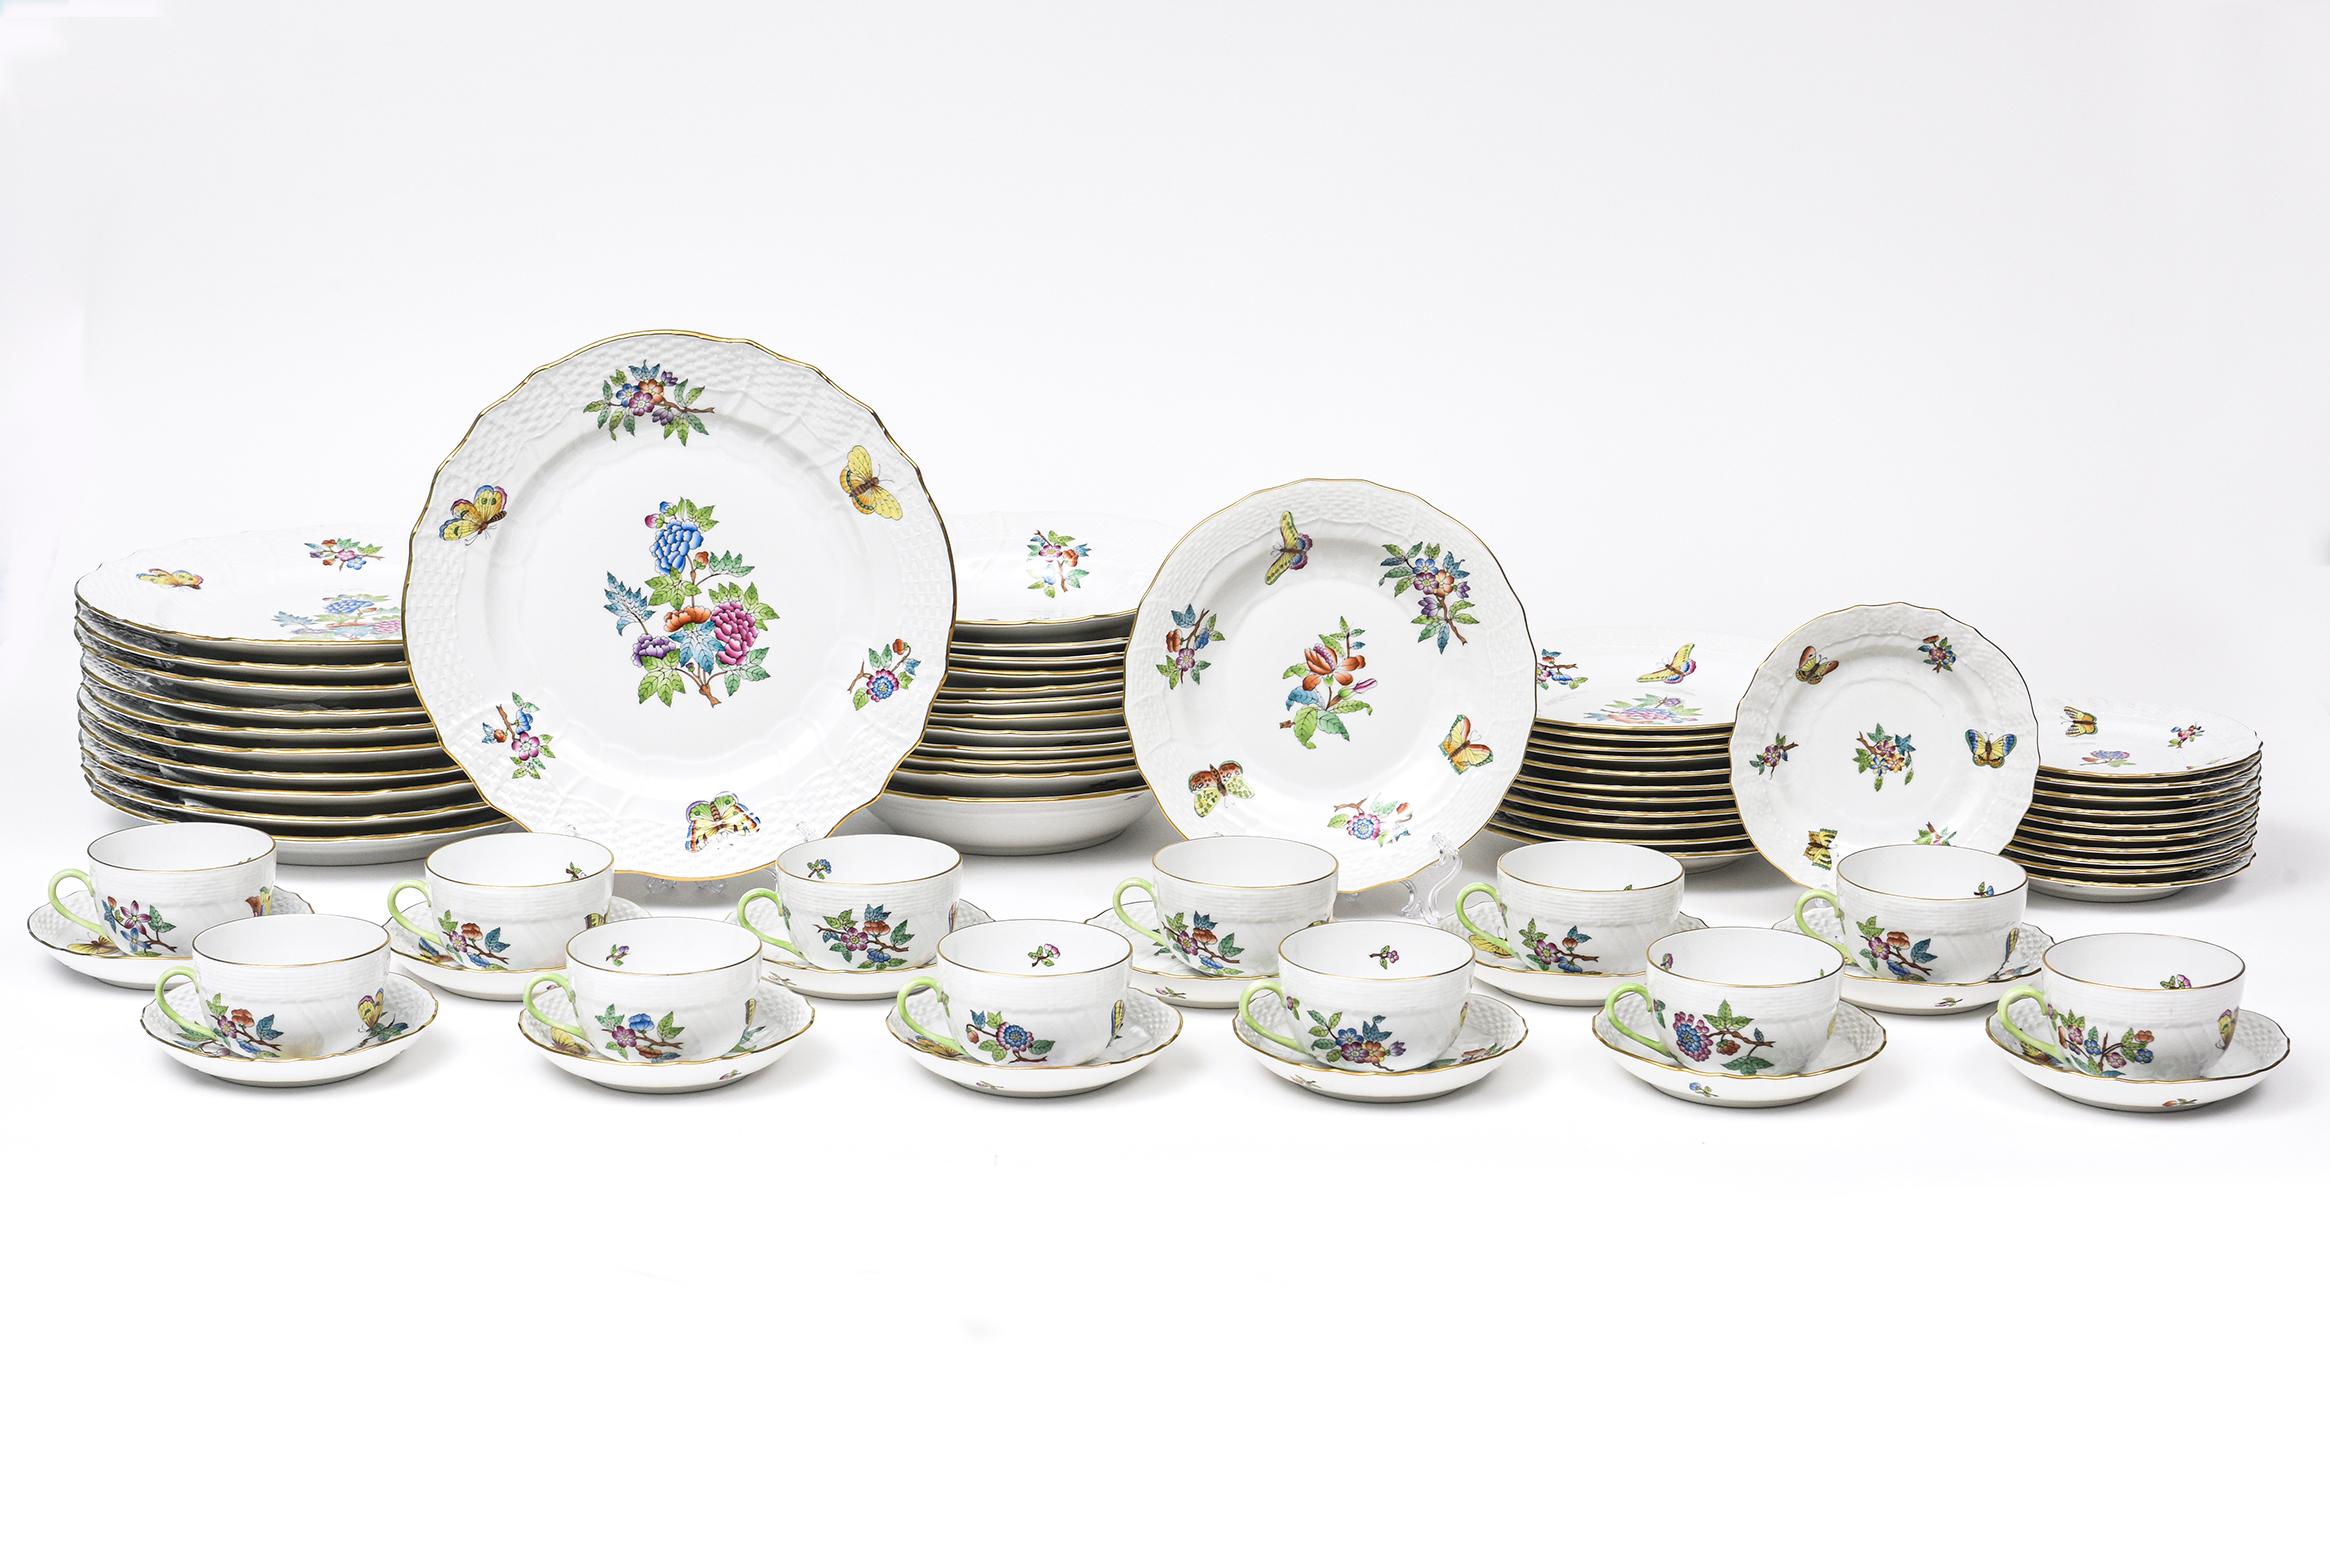 Elegant set of Herend China service for 12 minus 2 pieces (70 pieces in total). This is the older pattern of Queen Victoria that does not have the green border. It has a weave rim and a gold edge. The pattern features flowers and butterflies. Please